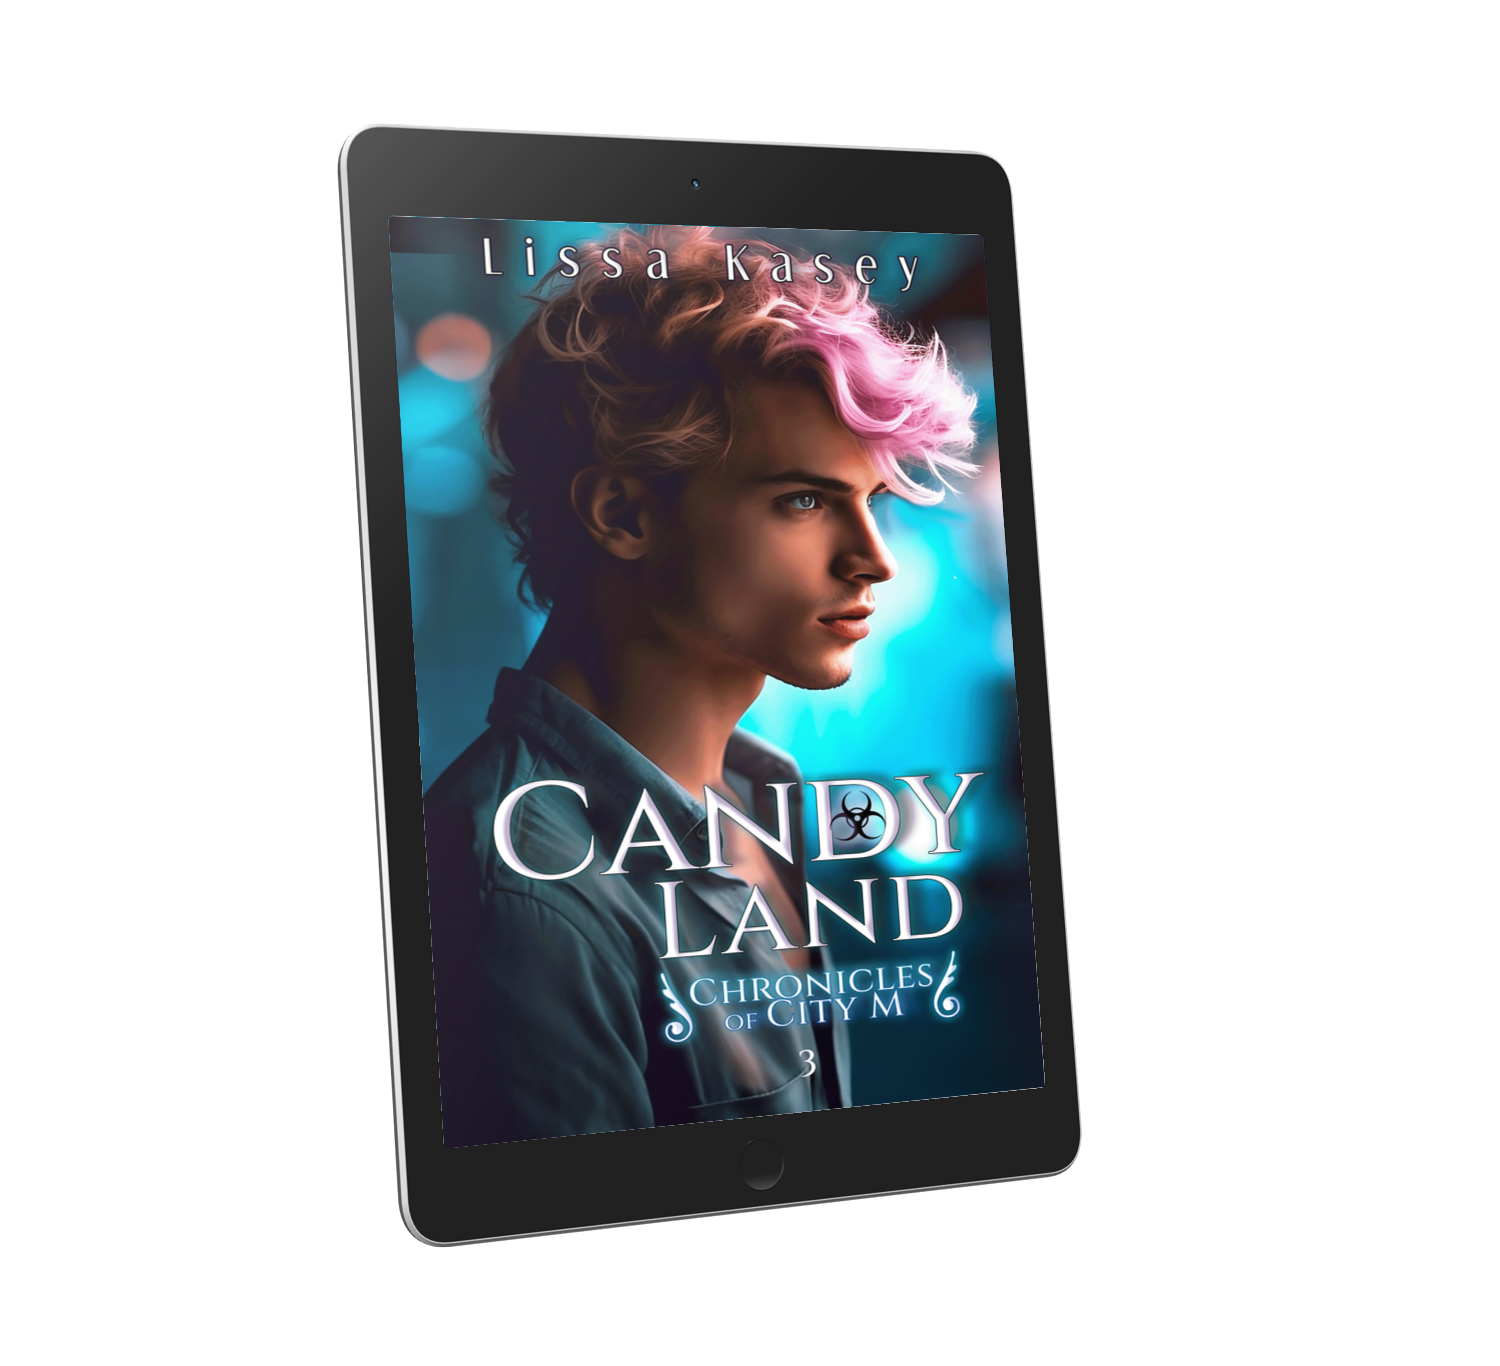 Candy Land by Lissa Kasey Chronicles of City M Book Three